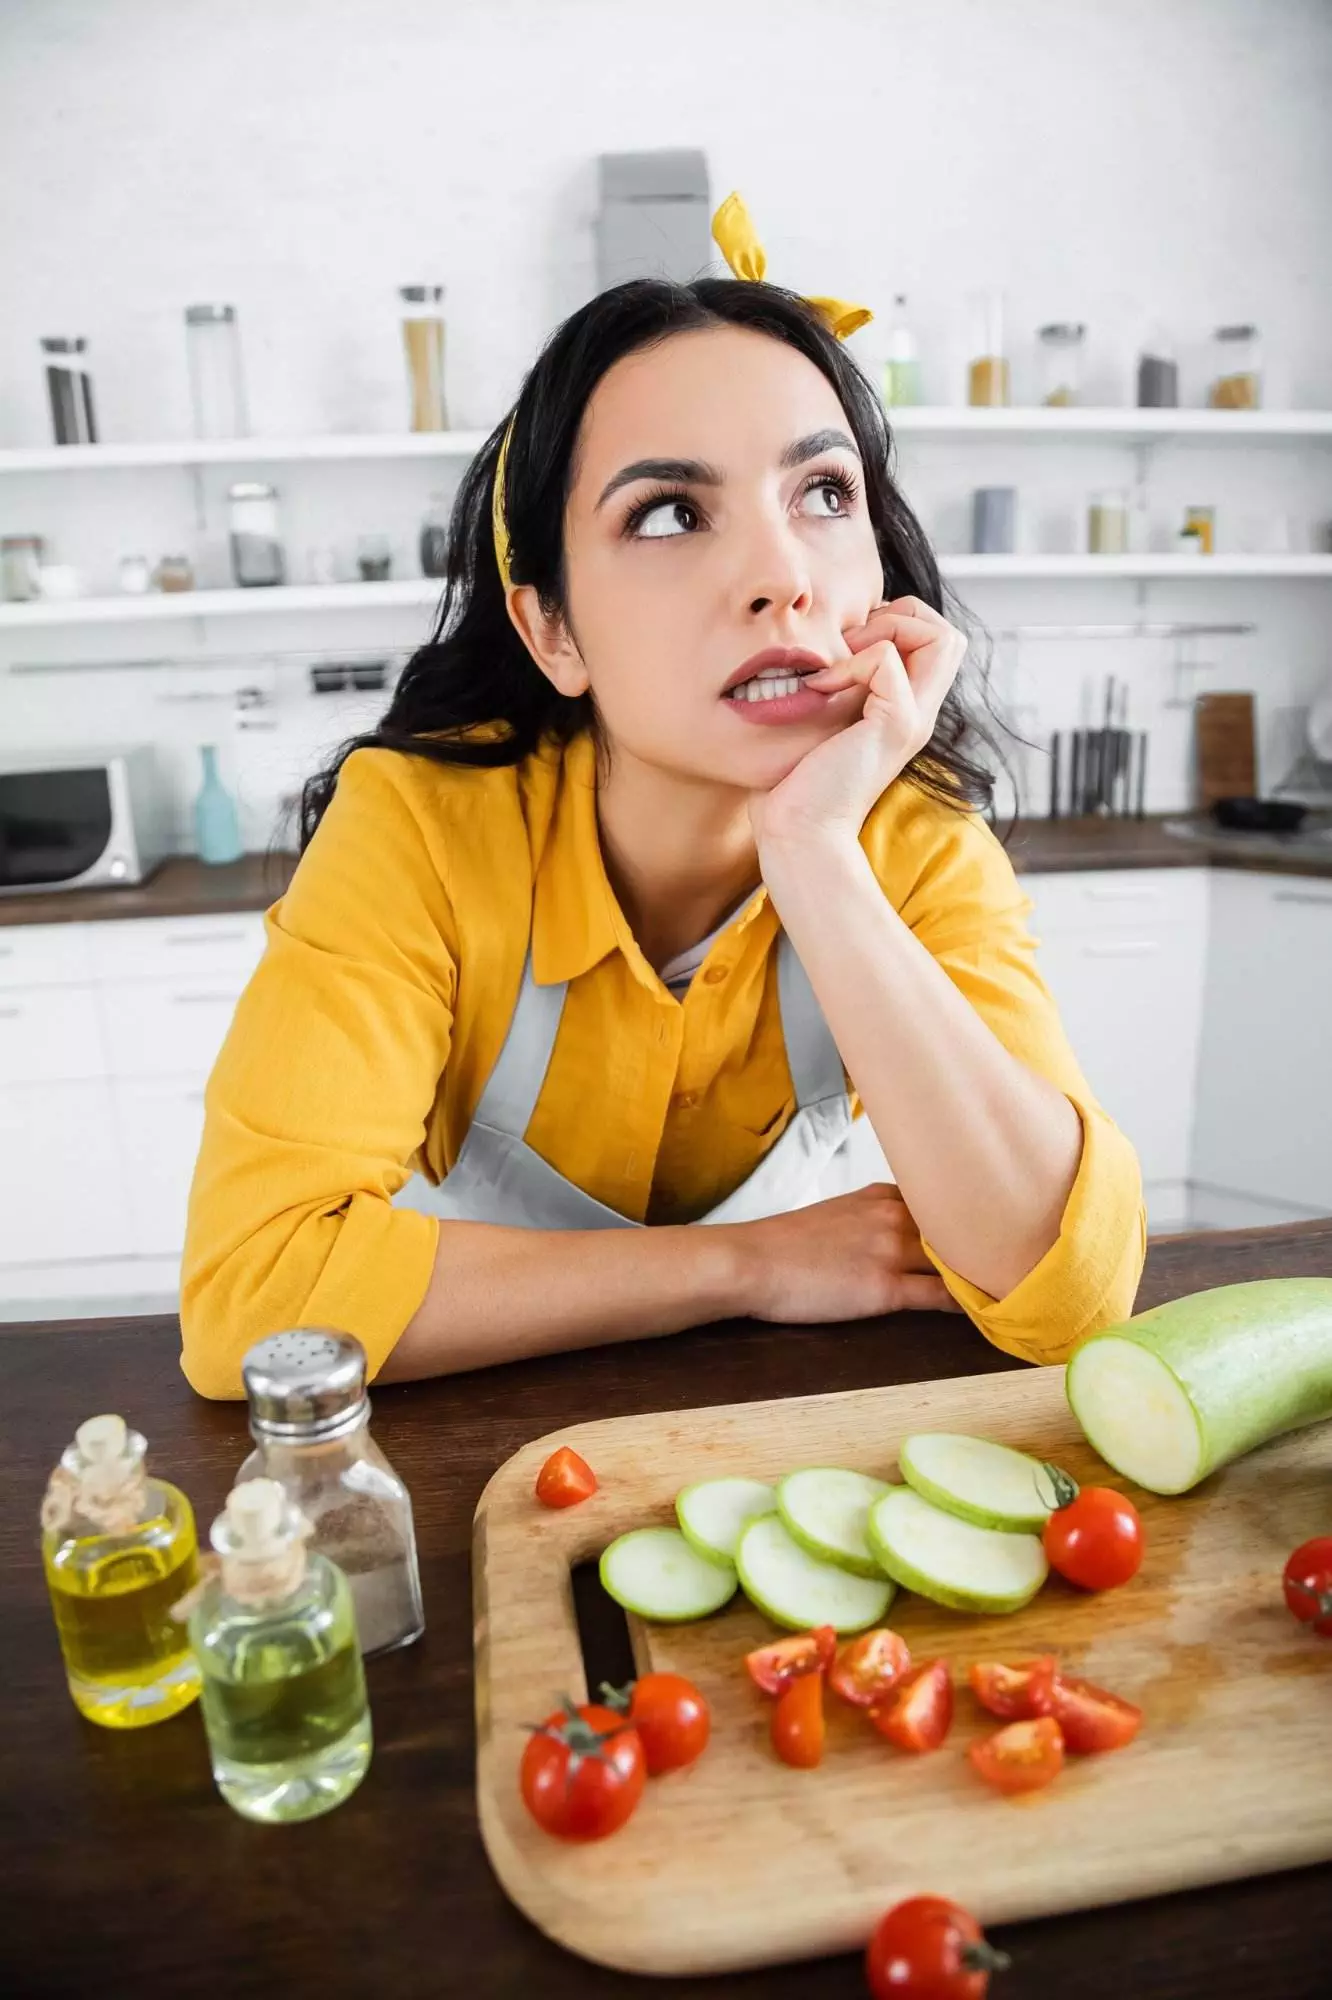 Woman contemplating while preparing vegetables in kitchen